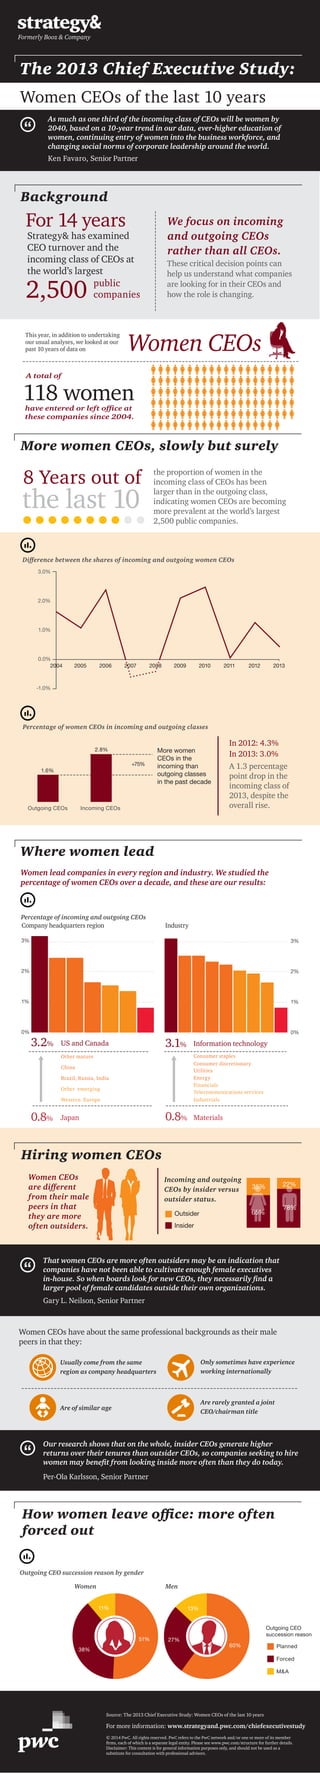 Women CEOs have about the same professional backgrounds as their male
peers in that they:
Are rarely granted a joint
CEO/chairman title
Usually come from the same
region as company headquarters
Only sometimes have experience
working internationally
Are of similar age
Our research shows that on the whole, insider CEOs generate higher
returns over their tenures than outsider CEOs, so companies seeking to hire
women may beneﬁt from looking inside more often than they do today.
Per-Ola Karlsson, Senior Partner
Where women lead
Women lead companies in every region and industry. We studied the
percentage of women CEOs over a decade, and these are our results:
US and Canada Information technology
Japan
3.2%
0.8% Materials0.8%
Percentage of incoming and outgoing CEOs
3.1%
Company headquarters region Industry
0%
1%
2%
3%
0%
1%
2%
3%
Other mature
China
Brazil, Russia, India
Other emerging
Western Europe
Consumer staples
Consumer discretionary
Utilities
Energy
Financials
Telecommunications services
Industrials
Hiring women CEOs
Women CEOs
are diﬀerent
from their male
peers in that
they are more
often outsiders.
That women CEOs are more often outsiders may be an indication that
companies have not been able to cultivate enough female executives
in-house. So when boards look for new CEOs, they necessarily ﬁnd a
larger pool of female candidates outside their own organizations.
Gary L. Neilson, Senior Partner
Incoming and outgoing
CEOs by insider versus
outsider status.
Outsider
Insider
the proportion of women in the
incoming class of CEOs has been
larger than in the outgoing class,
indicating women CEOs are becoming
more prevalent at the world’s largest
2,500 public companies.
More women CEOs, slowly but surely
the last 10
8 Years out of
-1.0%
0.0%
1.0%
2.0%
3.0%
20052004 2006 2007 2008 2009 2010 2011 2012 2013
Diﬀerence between the shares of incoming and outgoing women CEOs
Percentage of women CEOs in incoming and outgoing classes
More women
CEOs in the
incoming than
outgoing classes
in the past decade
Outgoing CEOs Incoming CEOs
+75%
1.6%
2.8%
have entered or left oﬃce at
these companies since 2004.
A total of
118 women
This year, in addition to undertaking
our usual analyses, we looked at our
past 10 years of data on
The 2013 Chief Executive Study:
Women CEOs of the last 10 years
As much as one third of the incoming class of CEOs will be women by
2040, based on a 10-year trend in our data, ever-higher education of
women, continuing entry of women into the business workforce, and
changing social norms of corporate leadership around the world.
Ken Favaro, Senior Partner
How women leave oﬃce: more often
forced out
Outgoing CEO succession reason by gender
Women Men
Outgoing CEO
succession reason
Planned
Forced
M&A
Source: The 2013 Chief Executive Study: Women CEOs of the last 10 years
11%
38%
51%
13%
27%
60%
Women CEOs
A 1.3 percentage
point drop in the
incoming class of
2013, despite the
overall rise.
In 2012: 4.3%
In 2013: 3.0%
© 2014 PwC. All rights reserved. PwC refers to the PwC network and/or one or more of its member
ﬁrms, each of which is a separate legal entity. Please see www.pwc.com/structure for further details.
Disclaimer: This content is for general information purposes only, and should not be used as a
substitute for consultation with professional advisors.
For more information: www.strategyand.pwc.com/chiefexecutivestudy
Background
We focus on incoming
and outgoing CEOs
rather than all CEOs.
For 14 years
Strategy& has examined
CEO turnover and the
incoming class of CEOs at
the world’s largest
2,500
These critical decision points can
help us understand what companies
are looking for in their CEOs and
how the role is changing.
public
companies
35% 22%
65%
78%
 